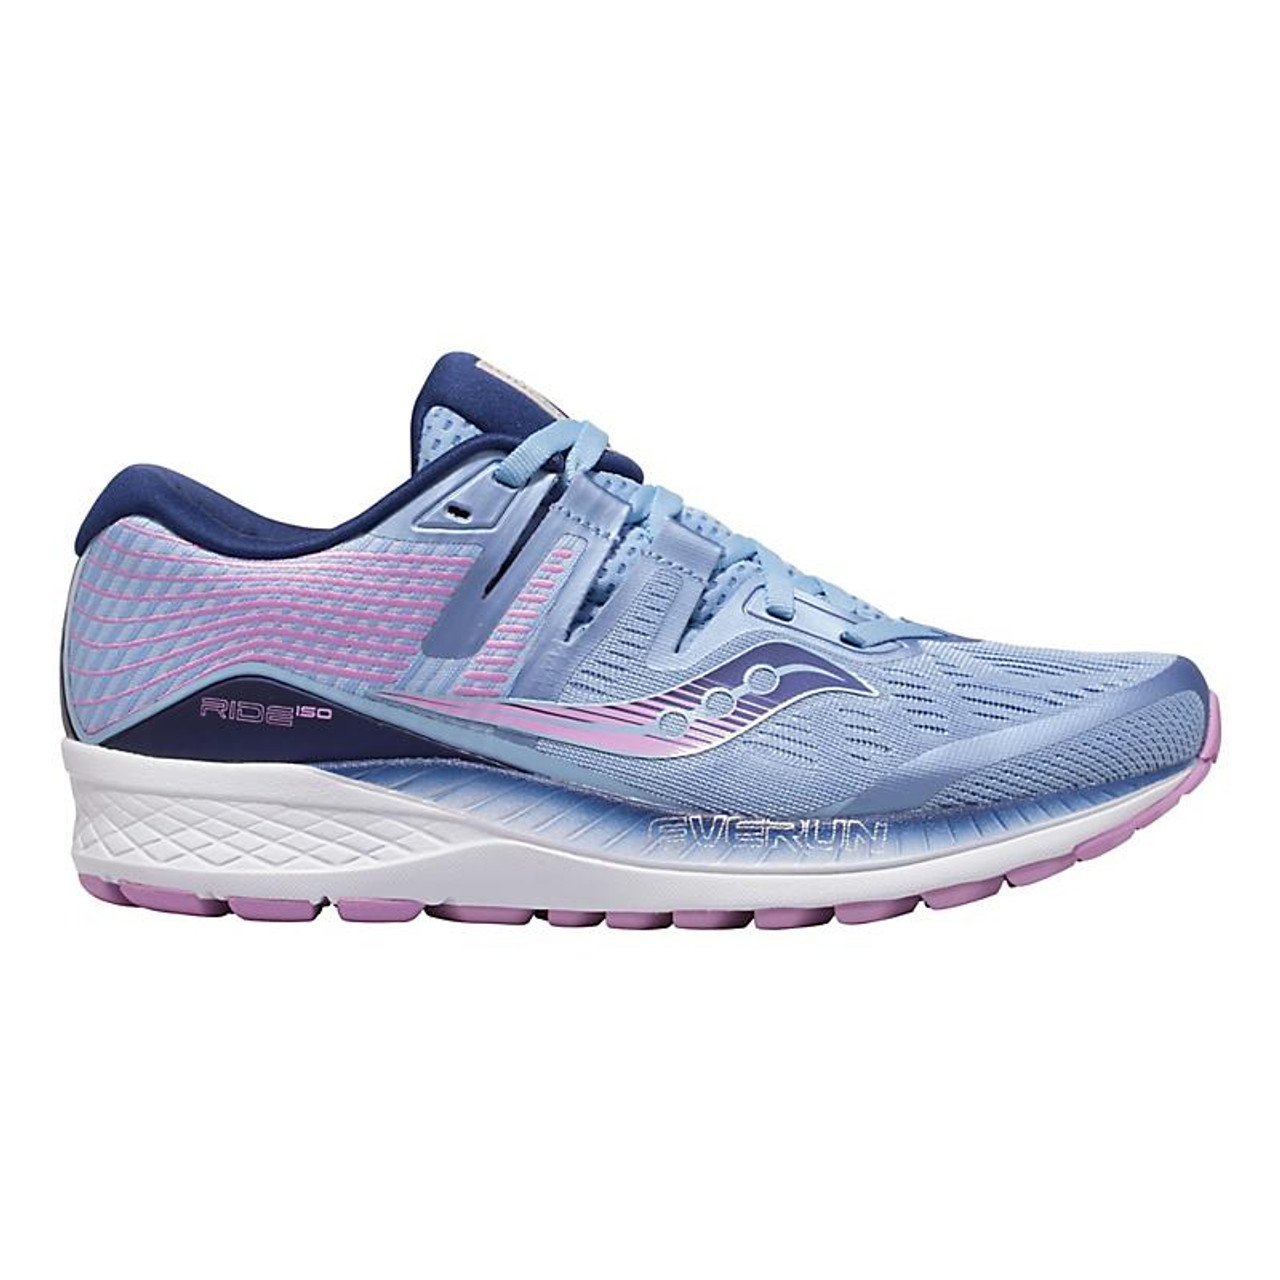 Black Saucony Ride ISO Womens Running Shoes 